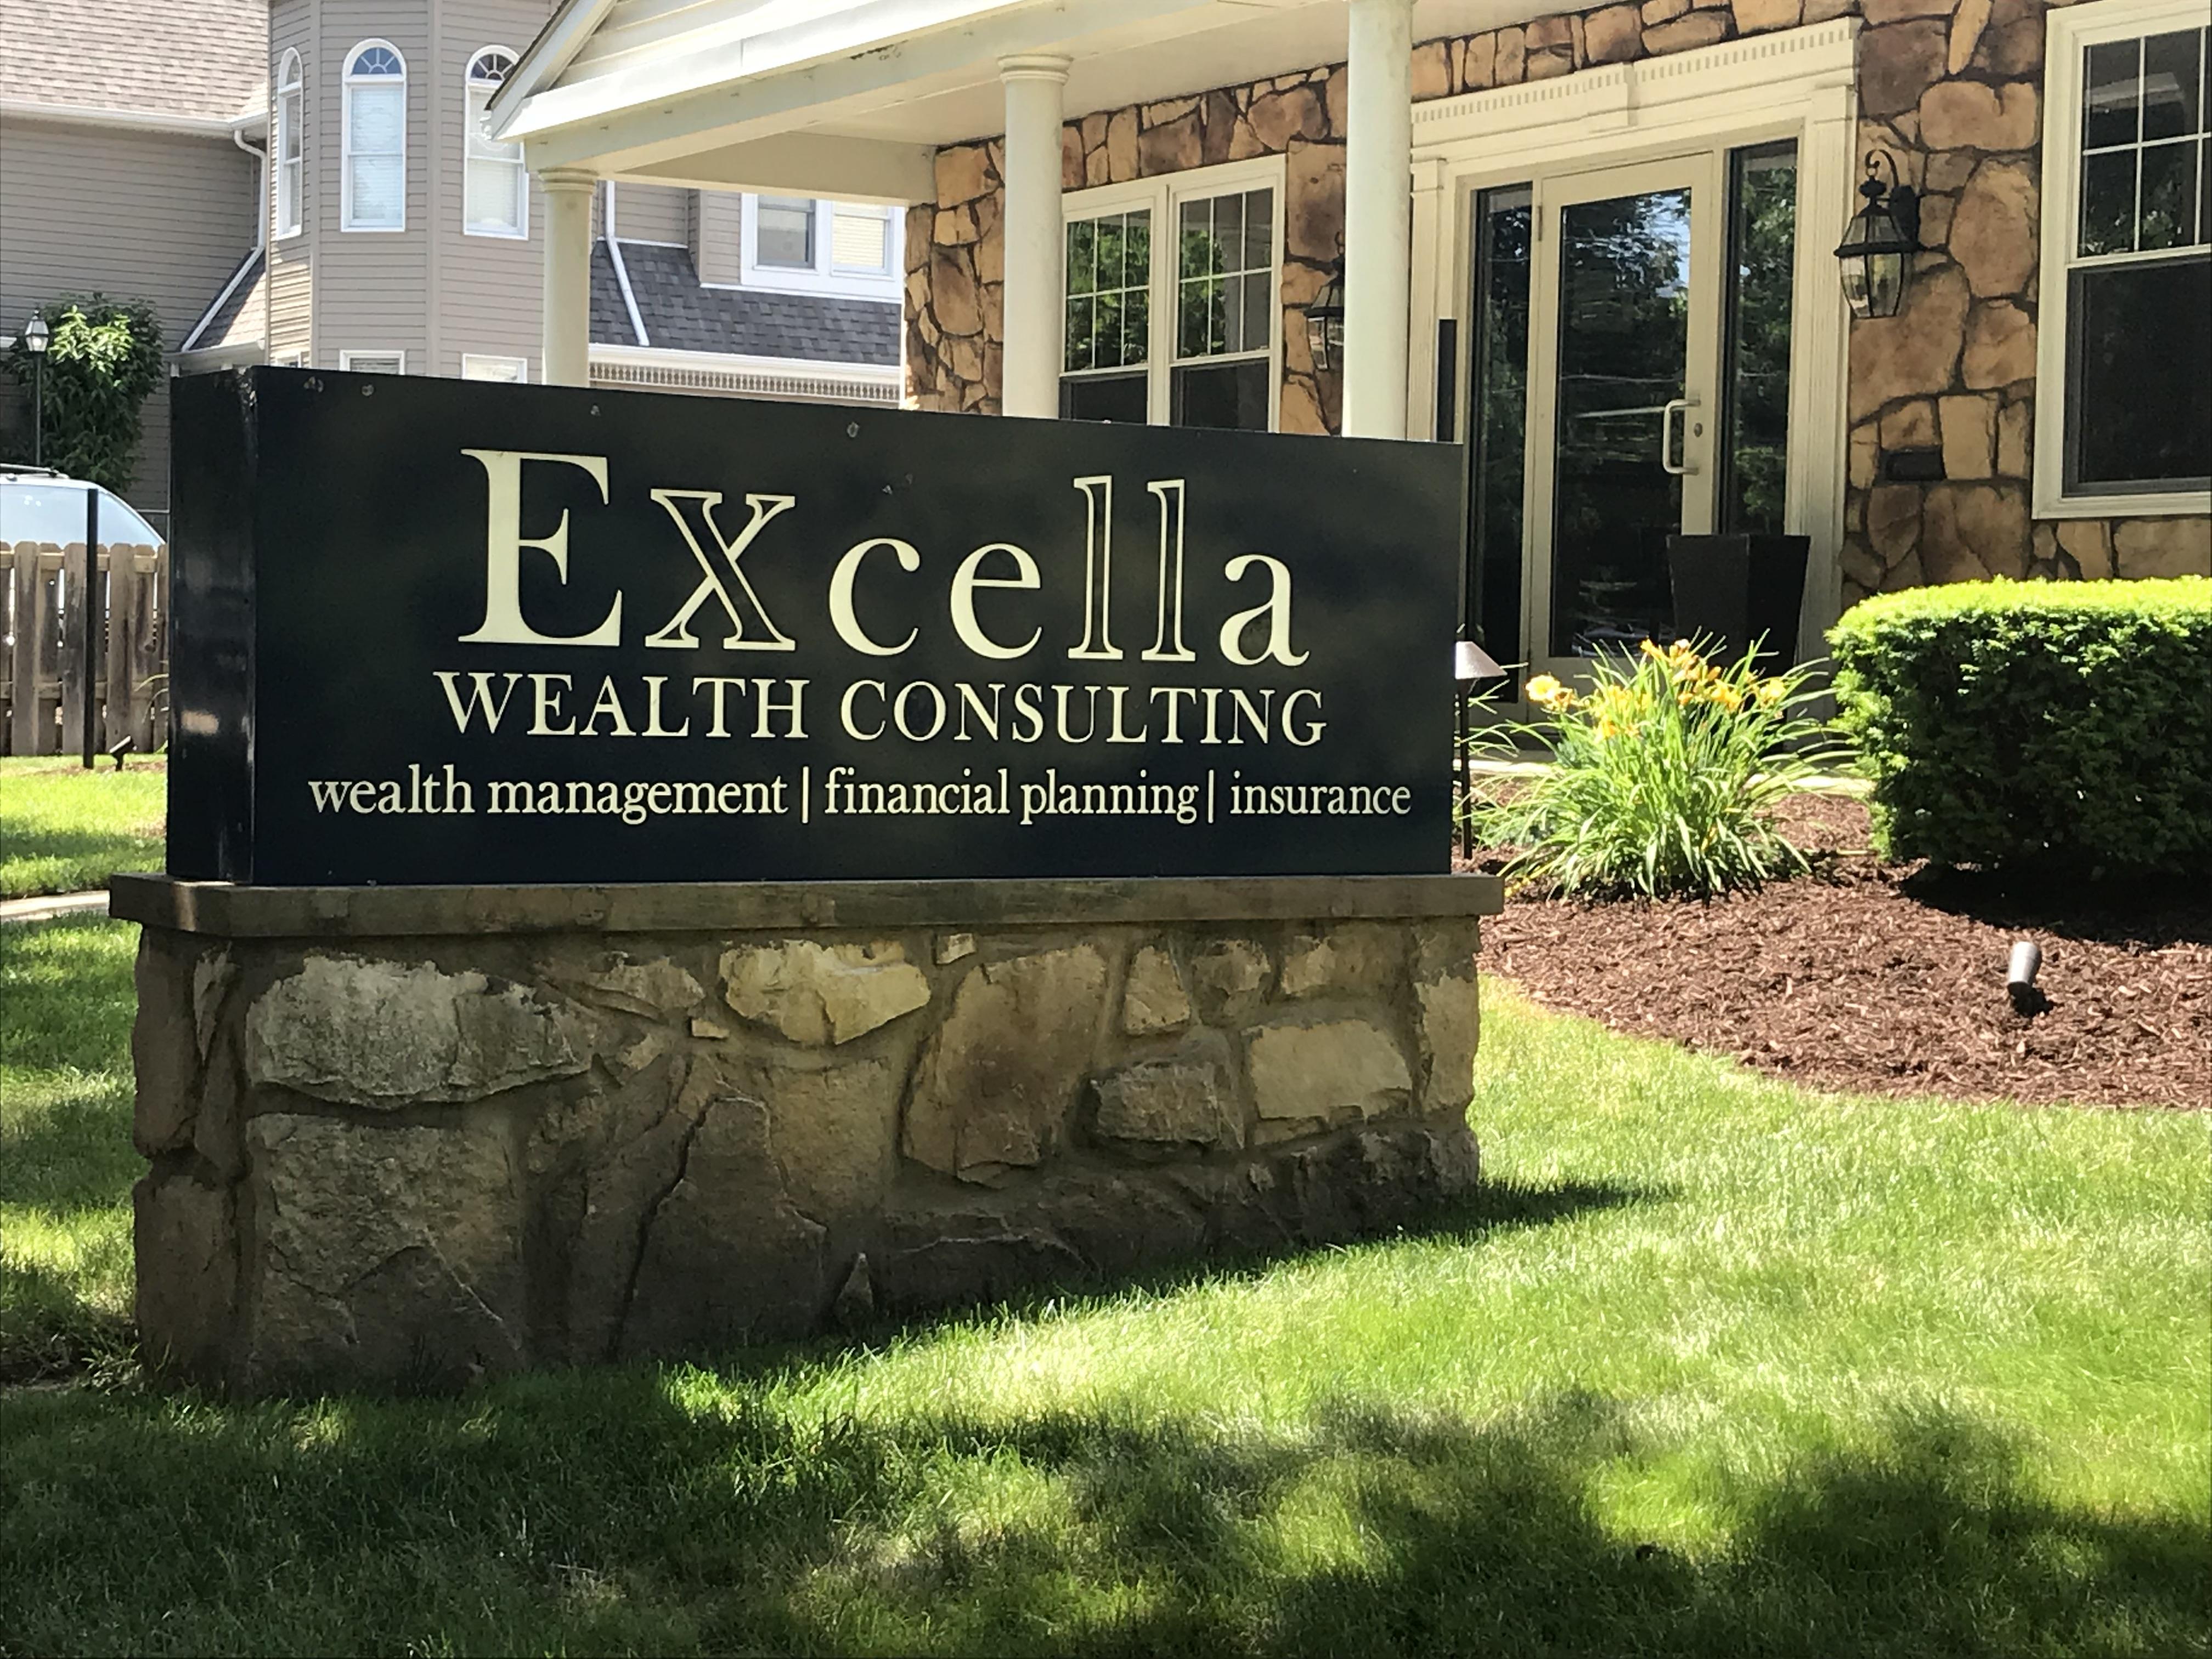 Excella Wealth Consulting image